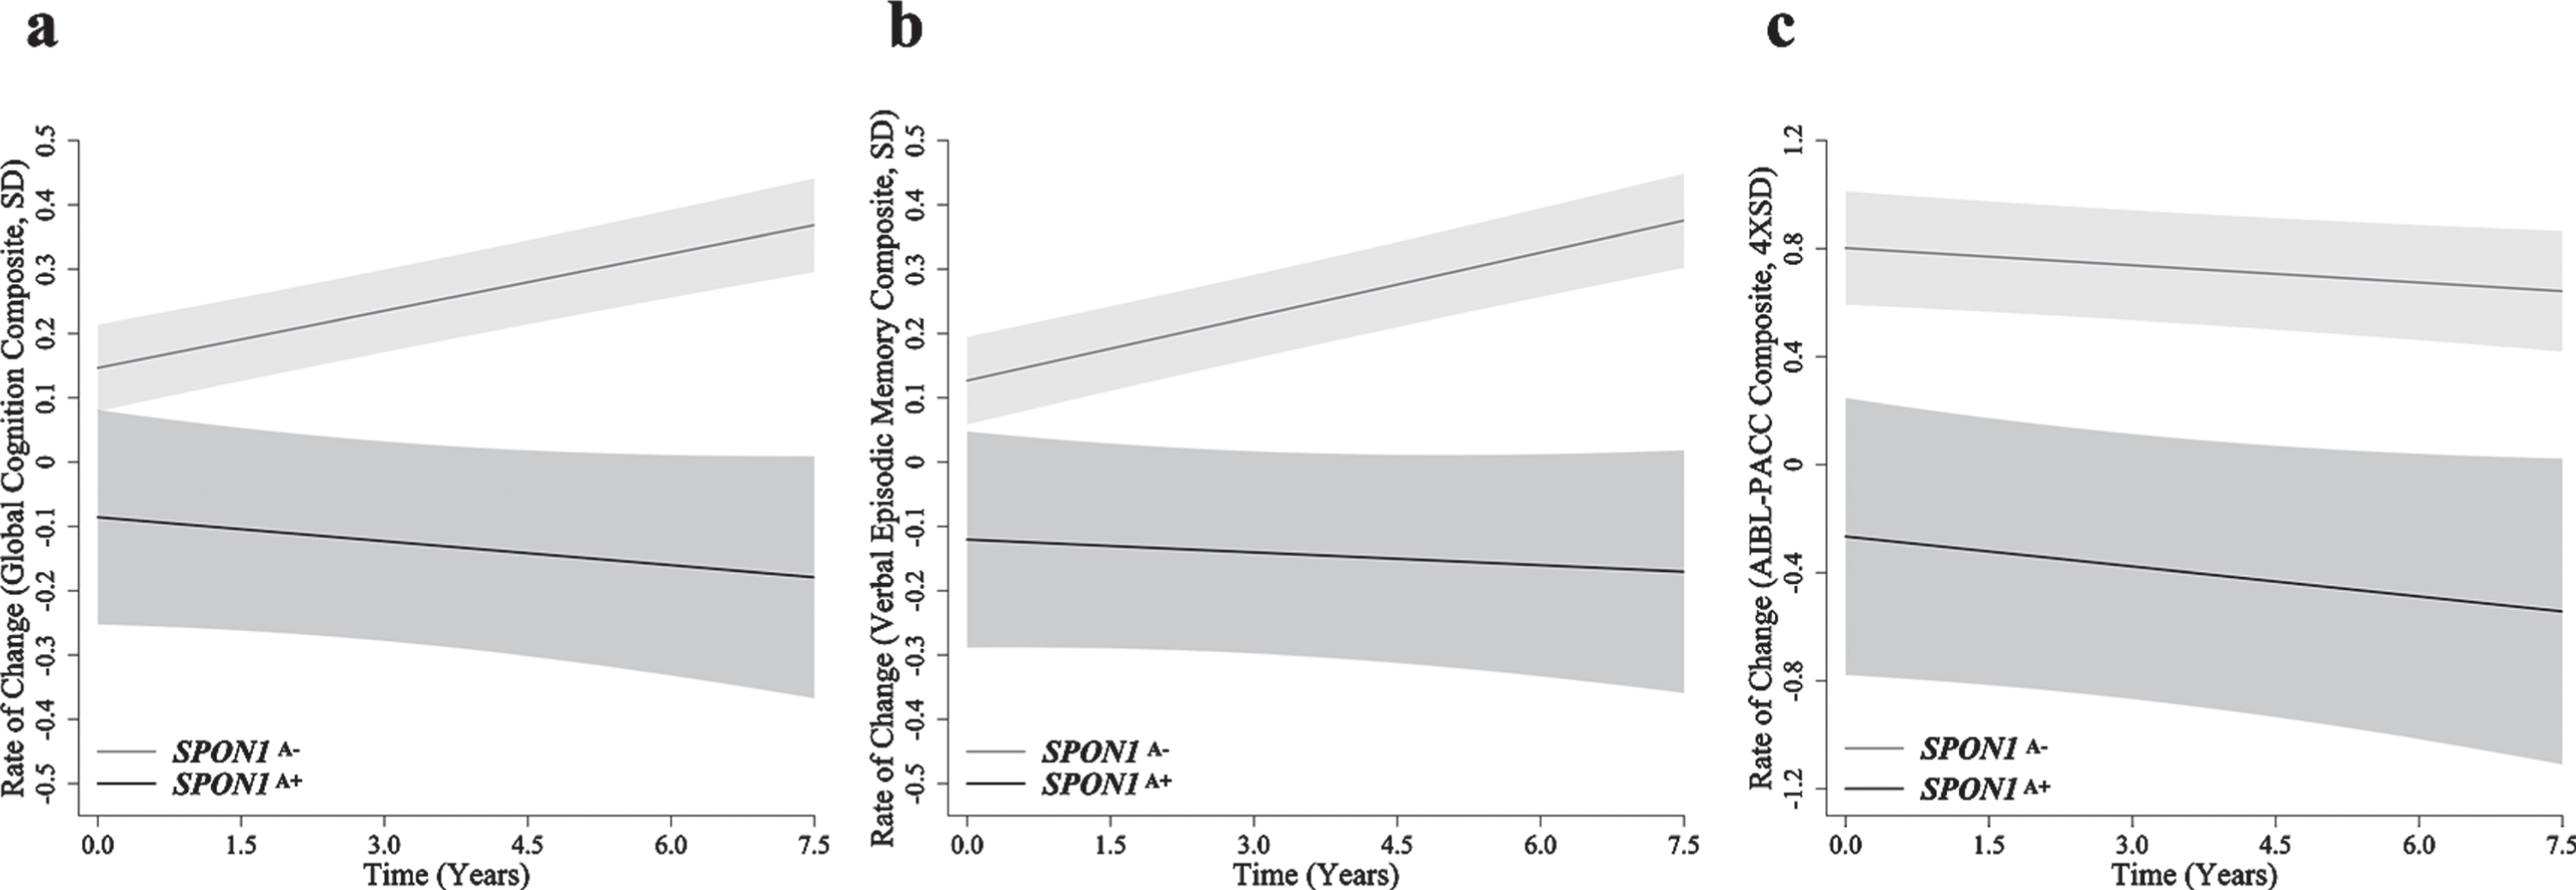 Rates of change in cognitively normal older adults. Rates of change are presented for (a) global cognition (SD/year), (b) verbal episodic memory (SD/year) and (c) AIBL-PACC (4×SD/year) in cognitively normal older adults (n = 590). SPON1A– (grey) and SPON1A+ (black). Controlling for APOE ɛ4 and amyloid-β status, AIBL-PACC analysis also controlled for age. Error bars represent time dependent standard error, *p < 0.05.